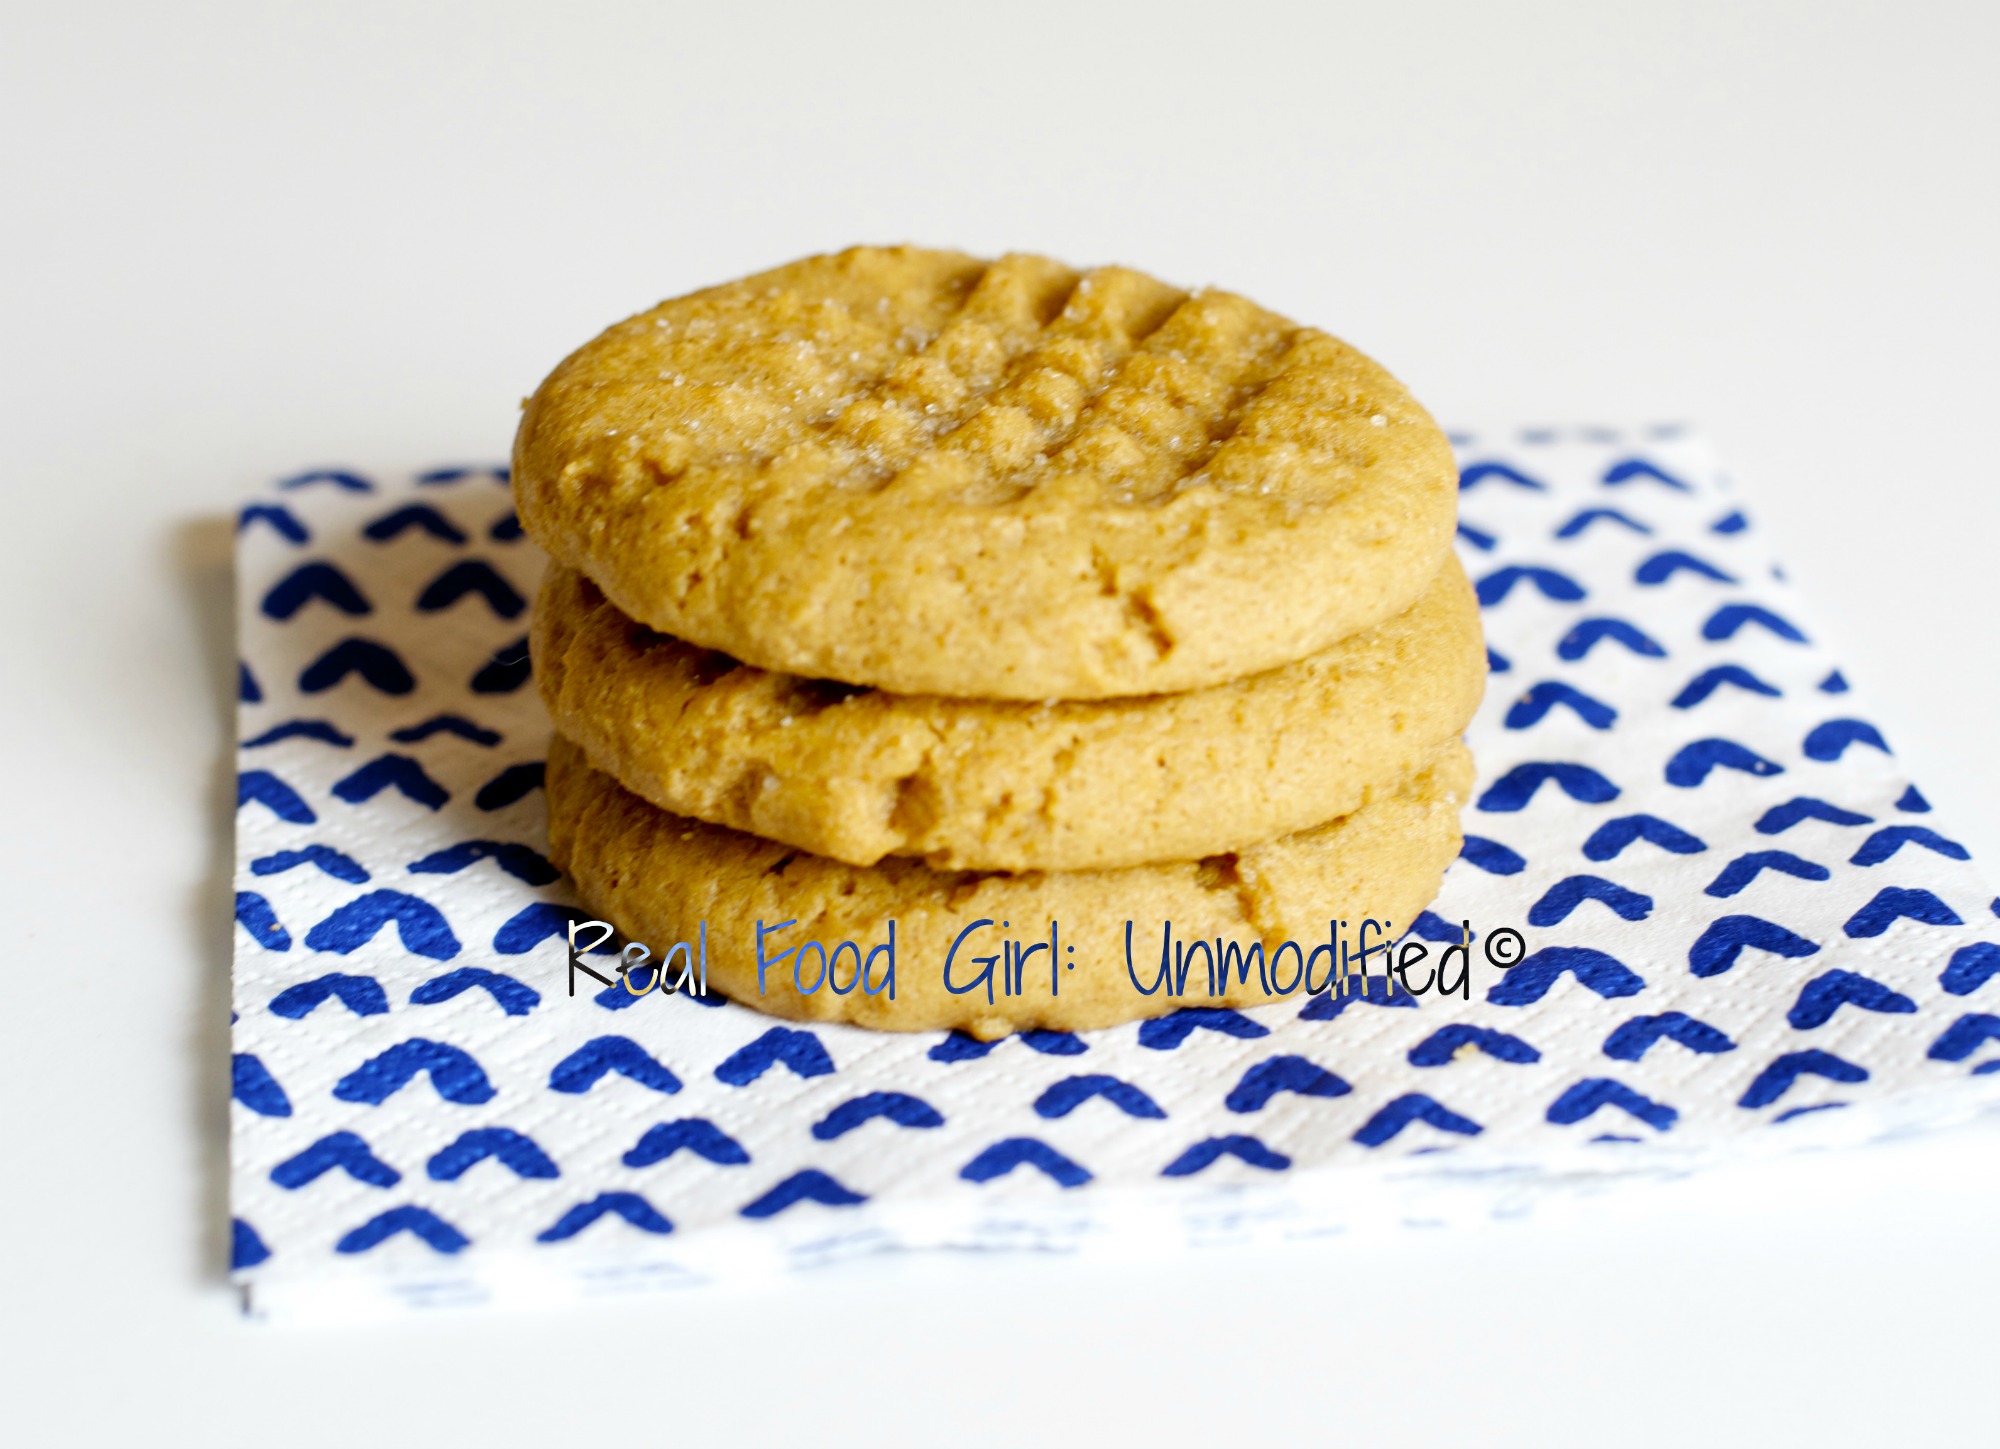 Soft & Chewy Peanut Butter Cookies. Organic and featured on Real Food Girl: Unmodified